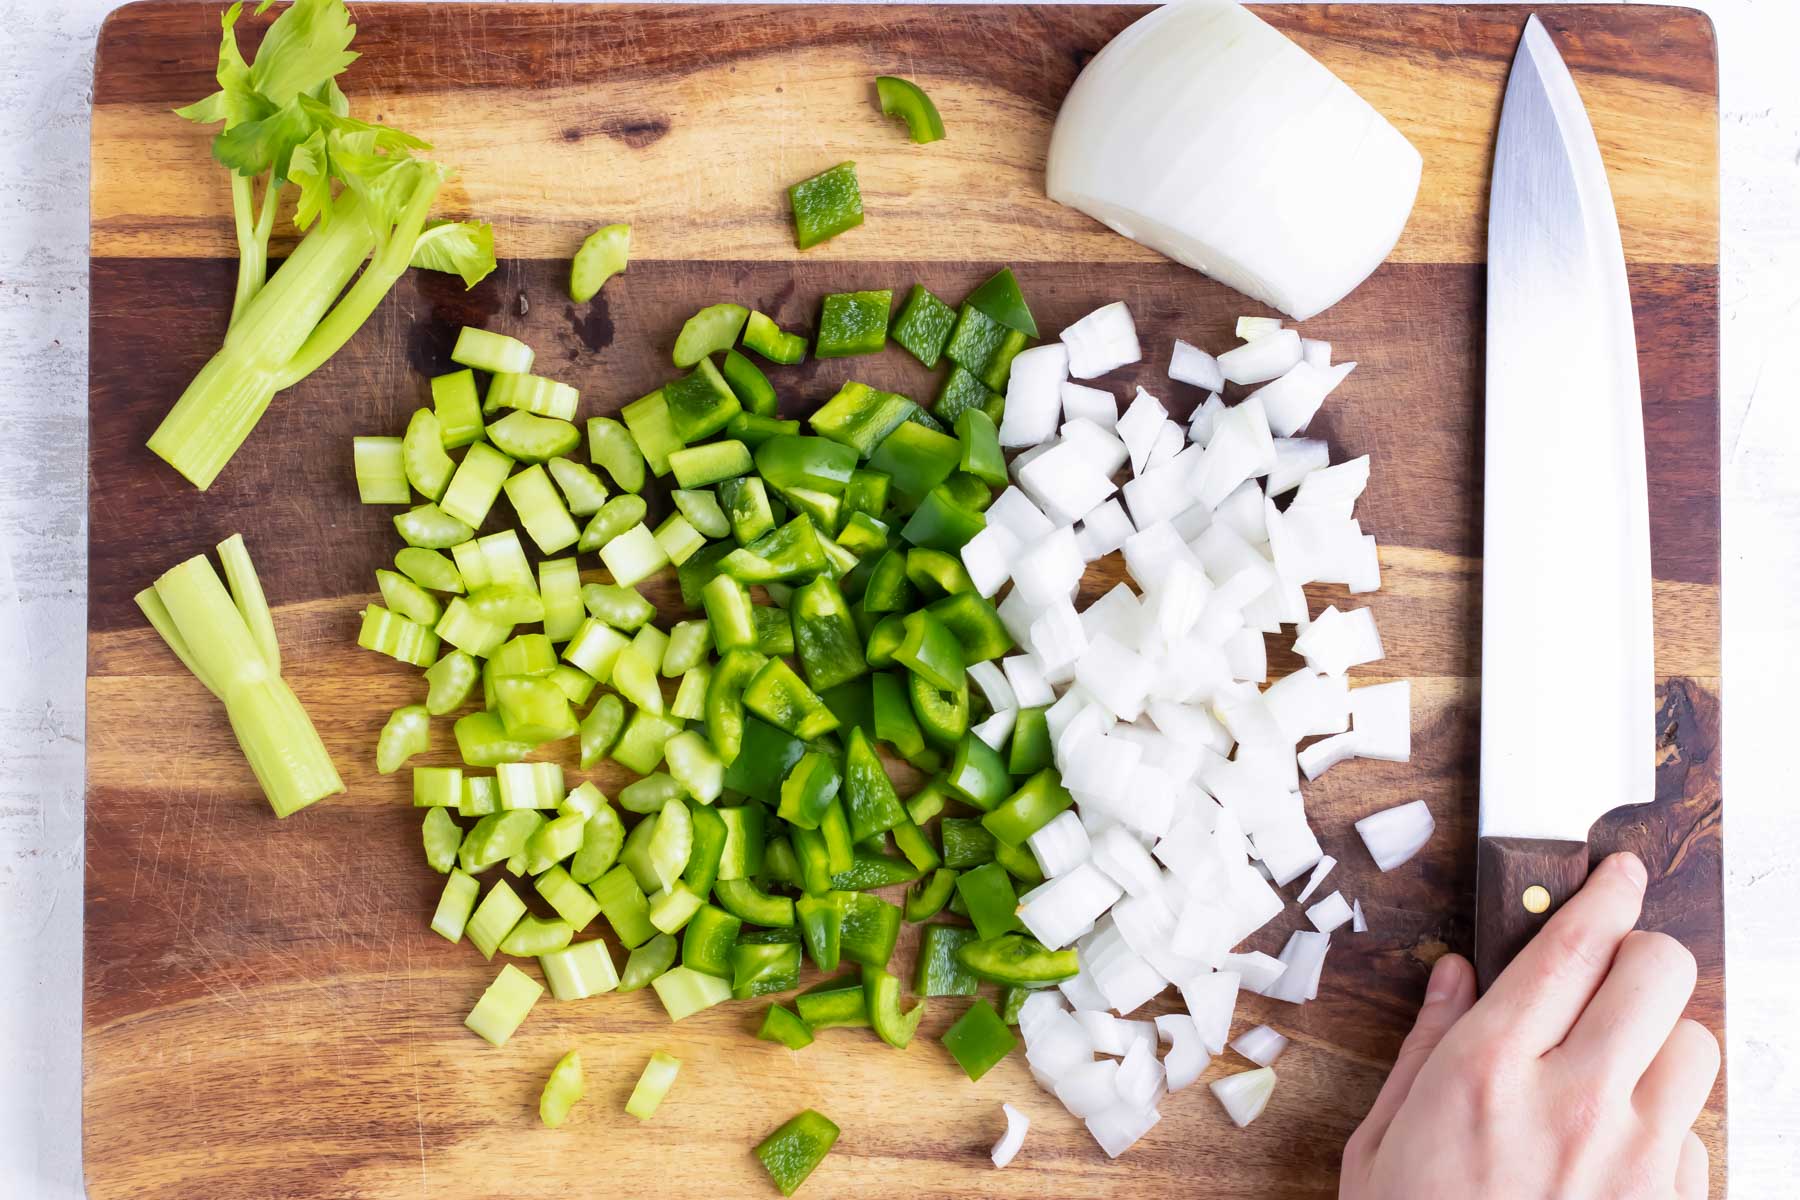 A cutting board shows diced celery, bell pepper, and onion.